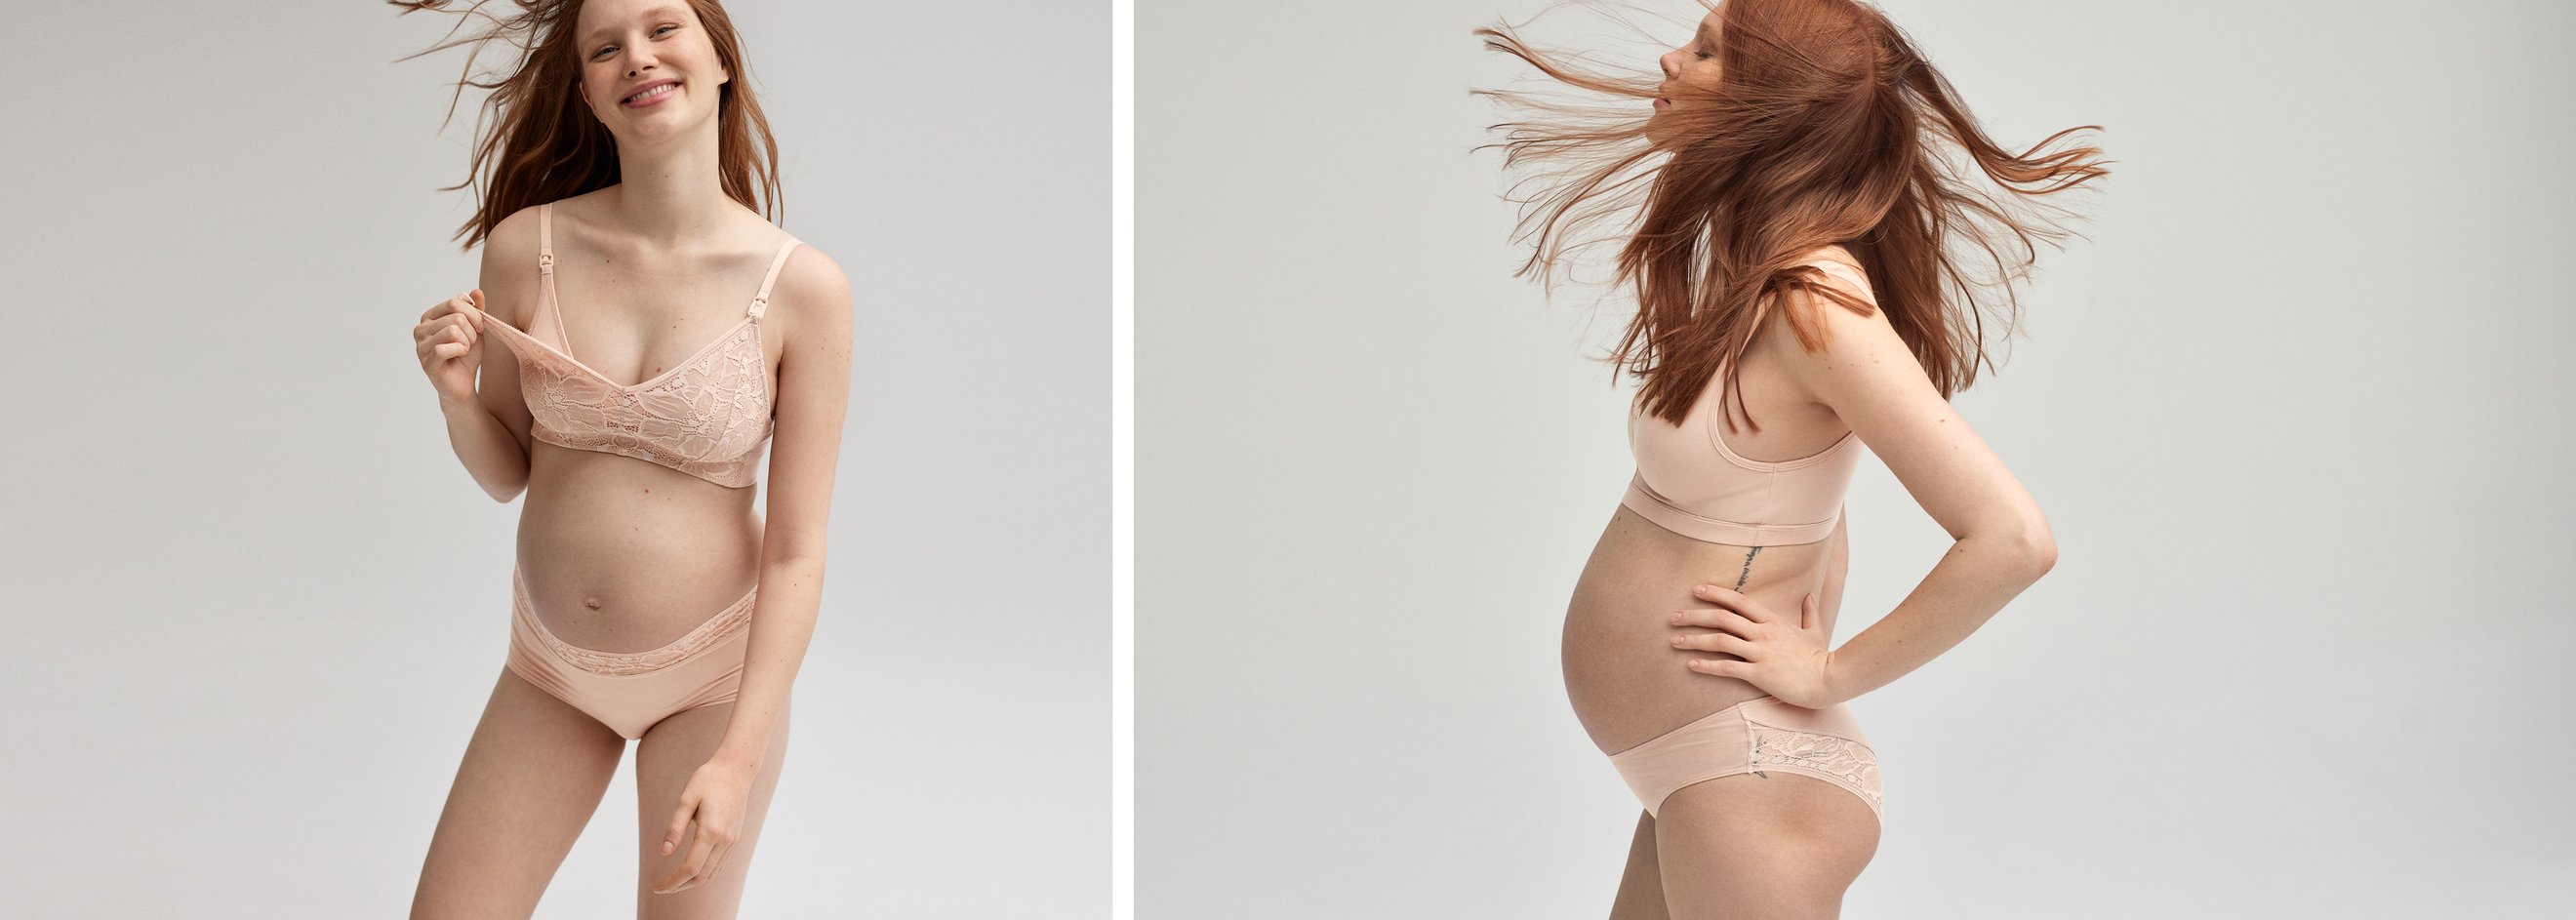 Why is it beneficial to wear a high waisted panty during pregnancy &  breastfeeding?